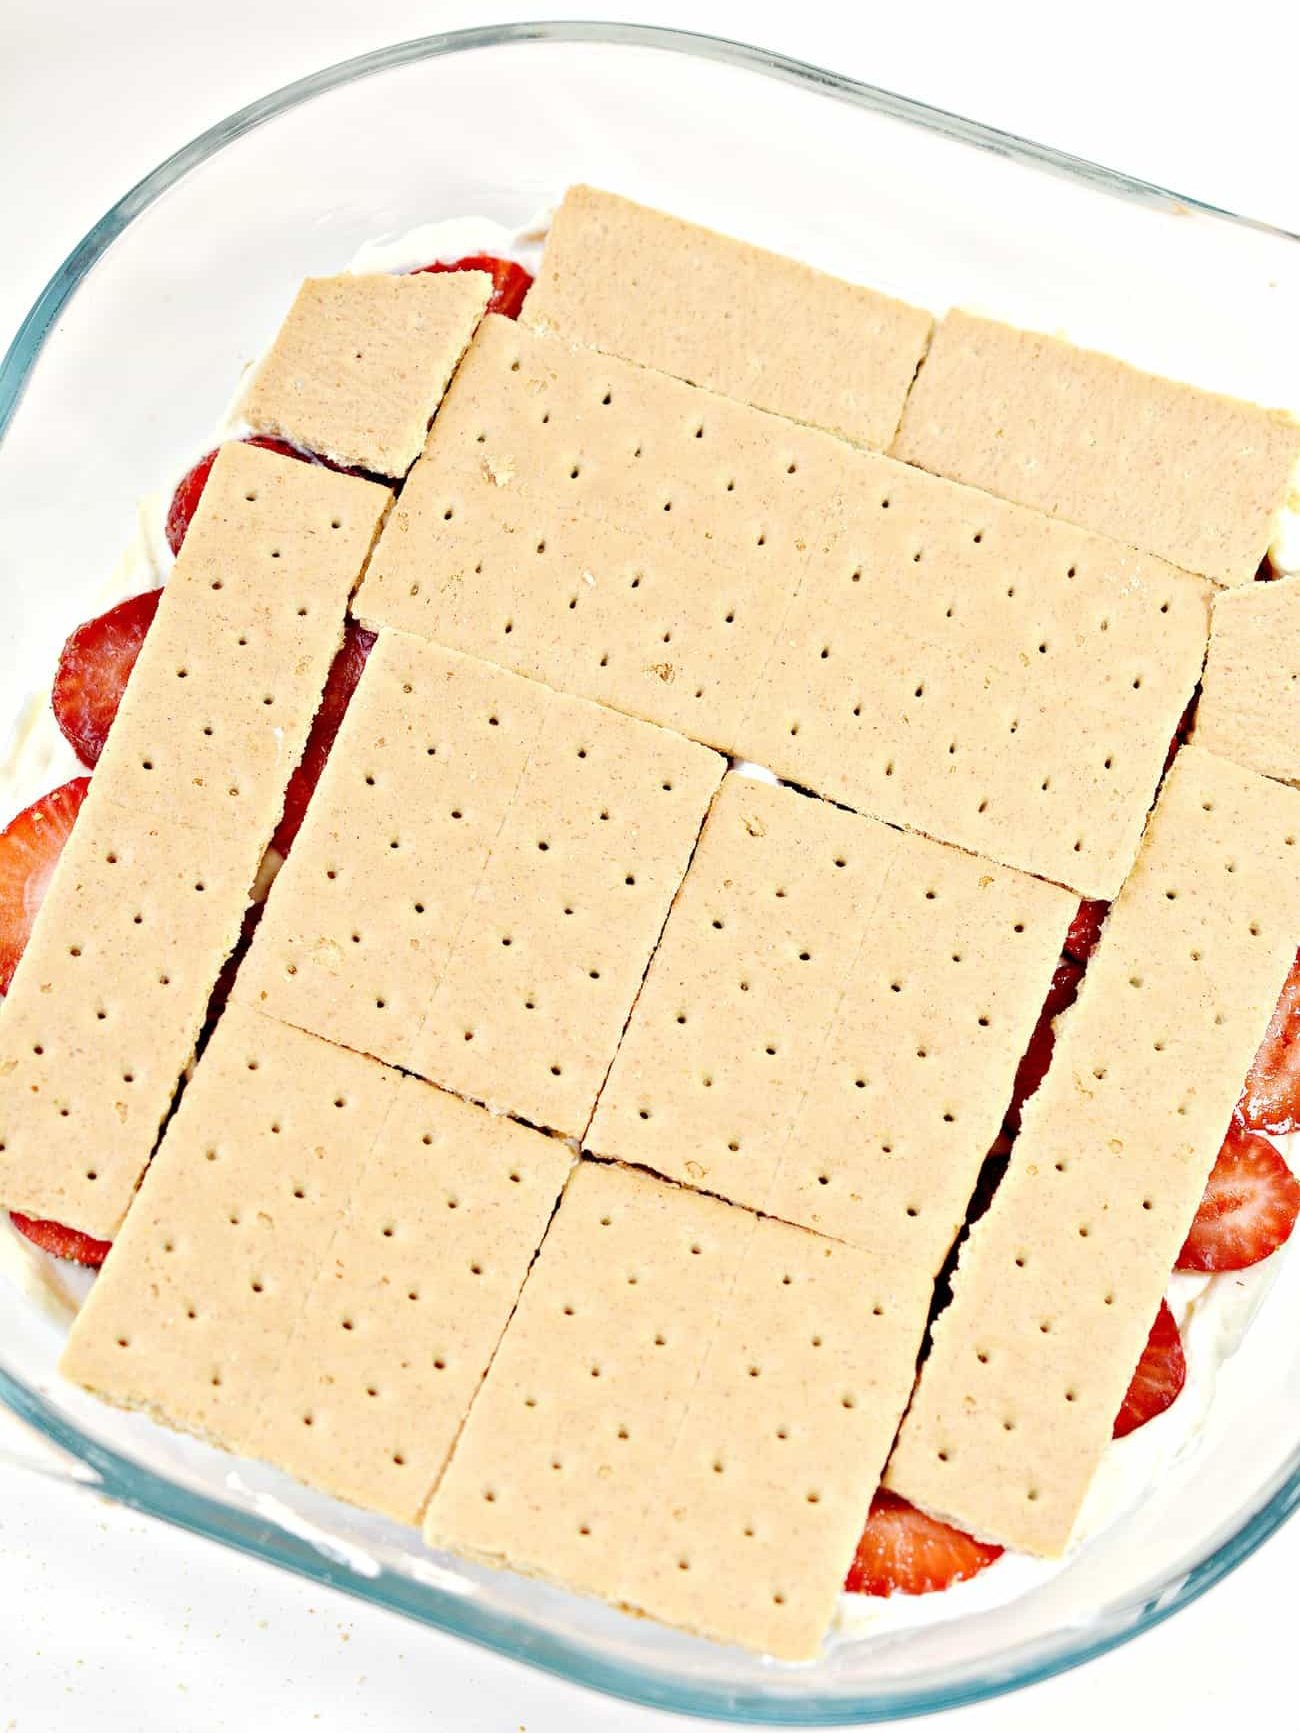 Put another layer of graham crackers on top of the strawberries.